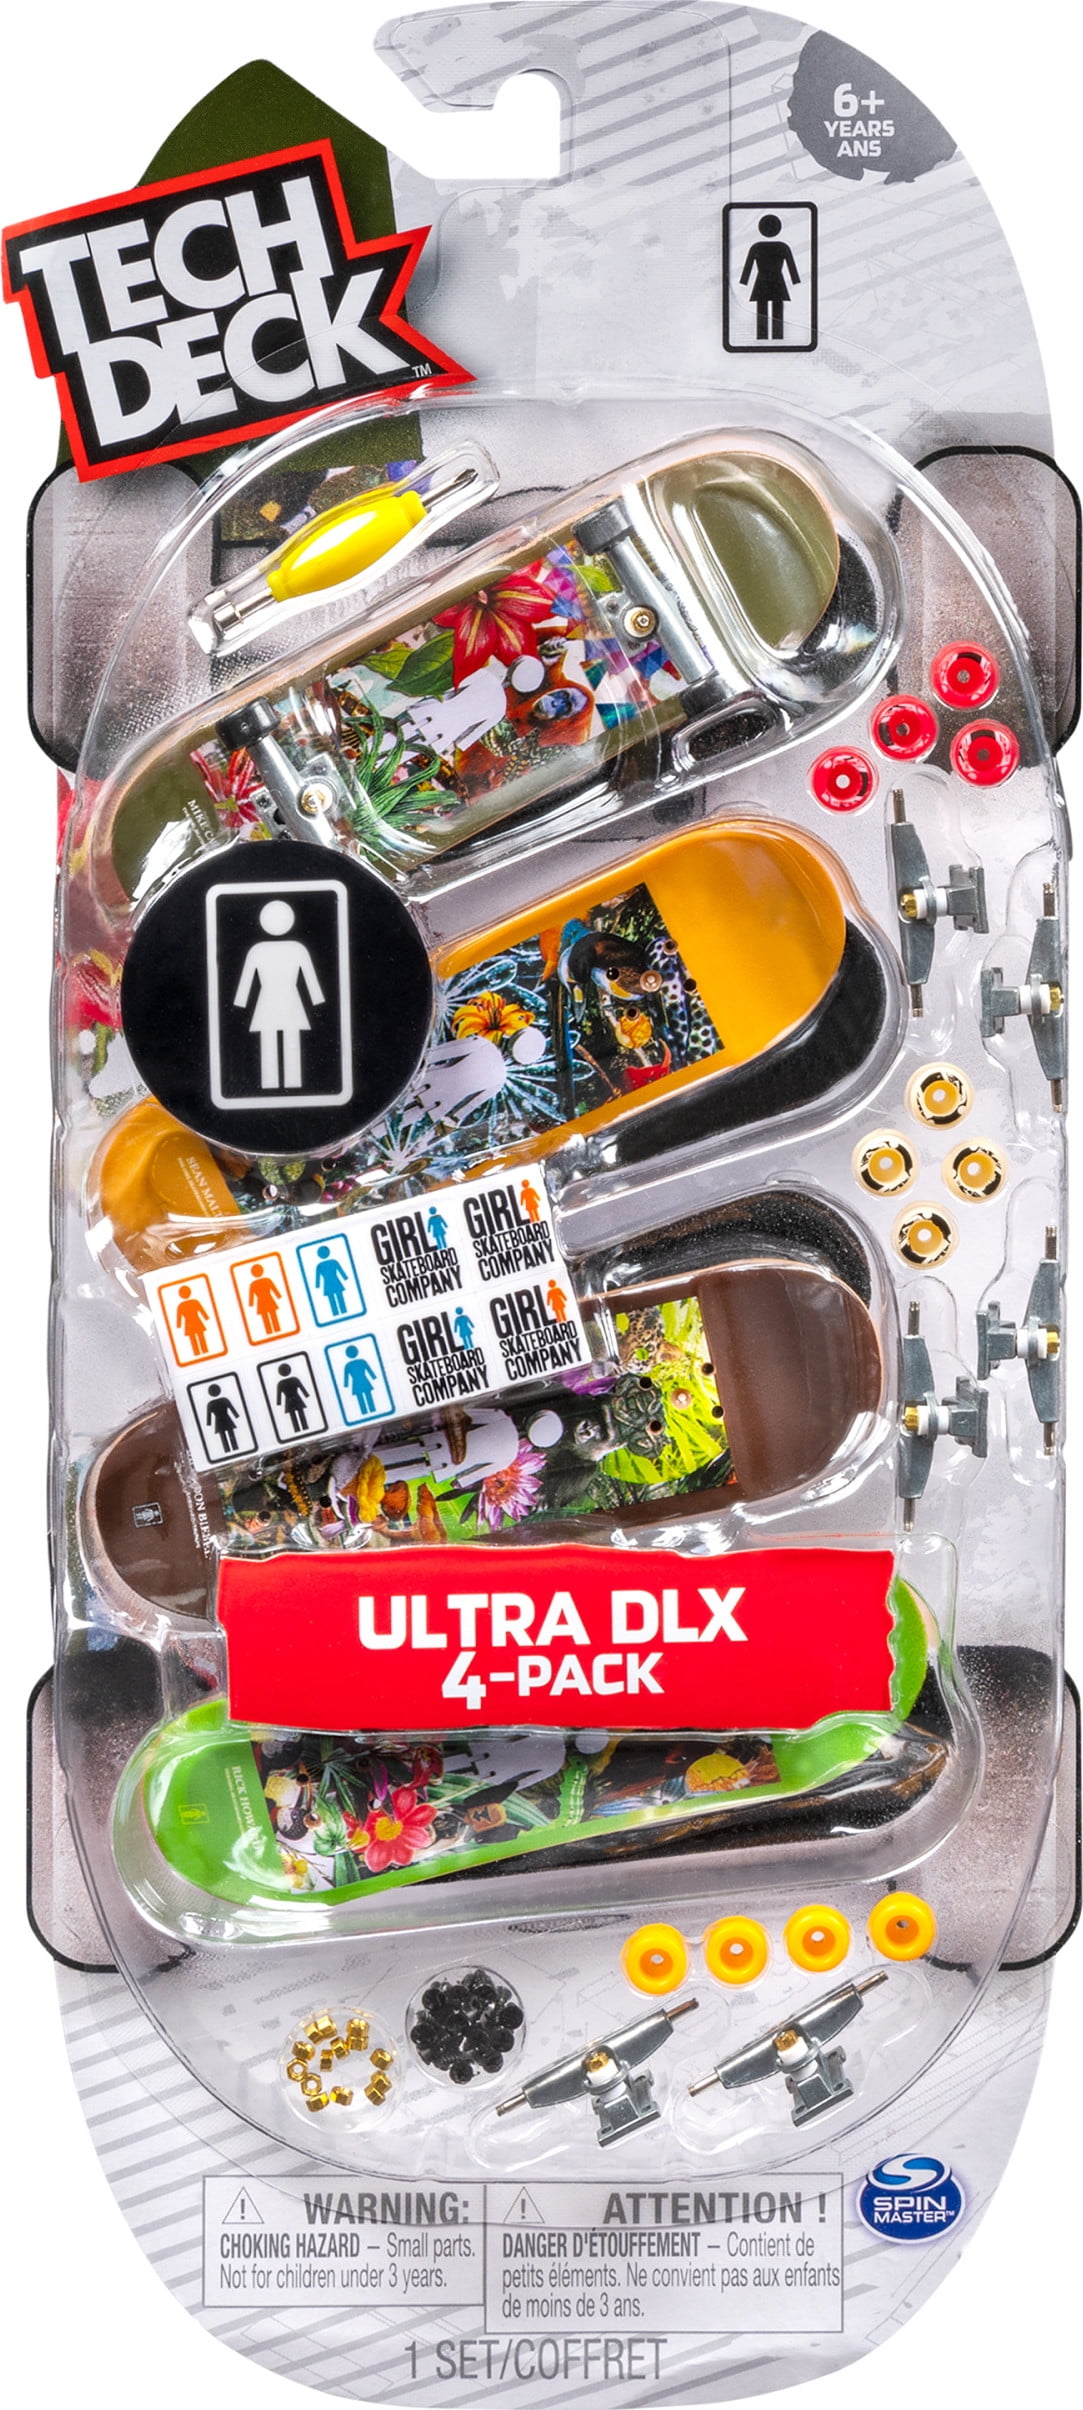 Tech Deck Ultra DLX 4 Pack 96mm Fingerboards Revive 20th Anniversary Special Edition Spin Master 20090754